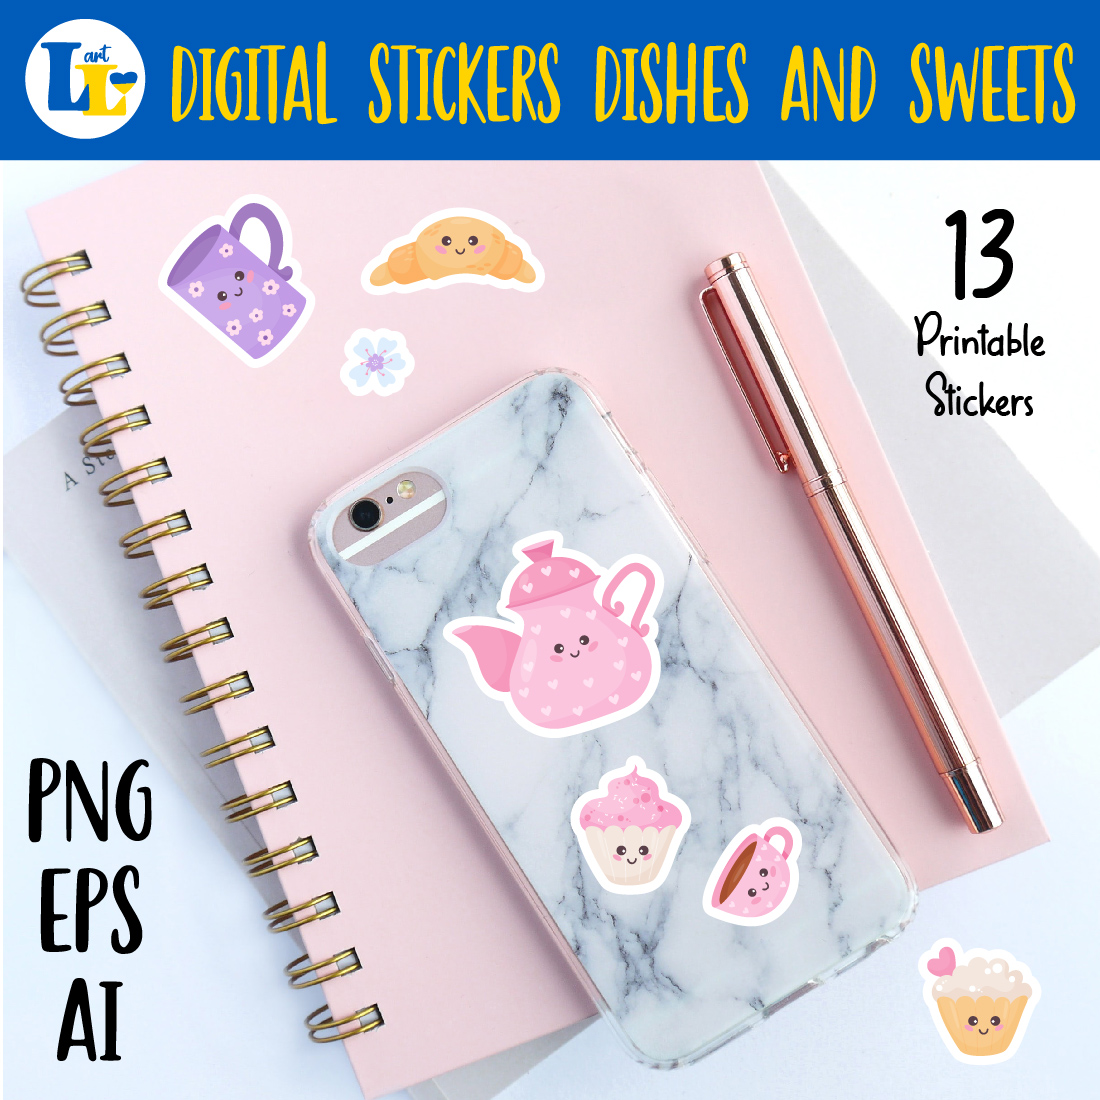 Phone case with stickers on it next to a notebook.